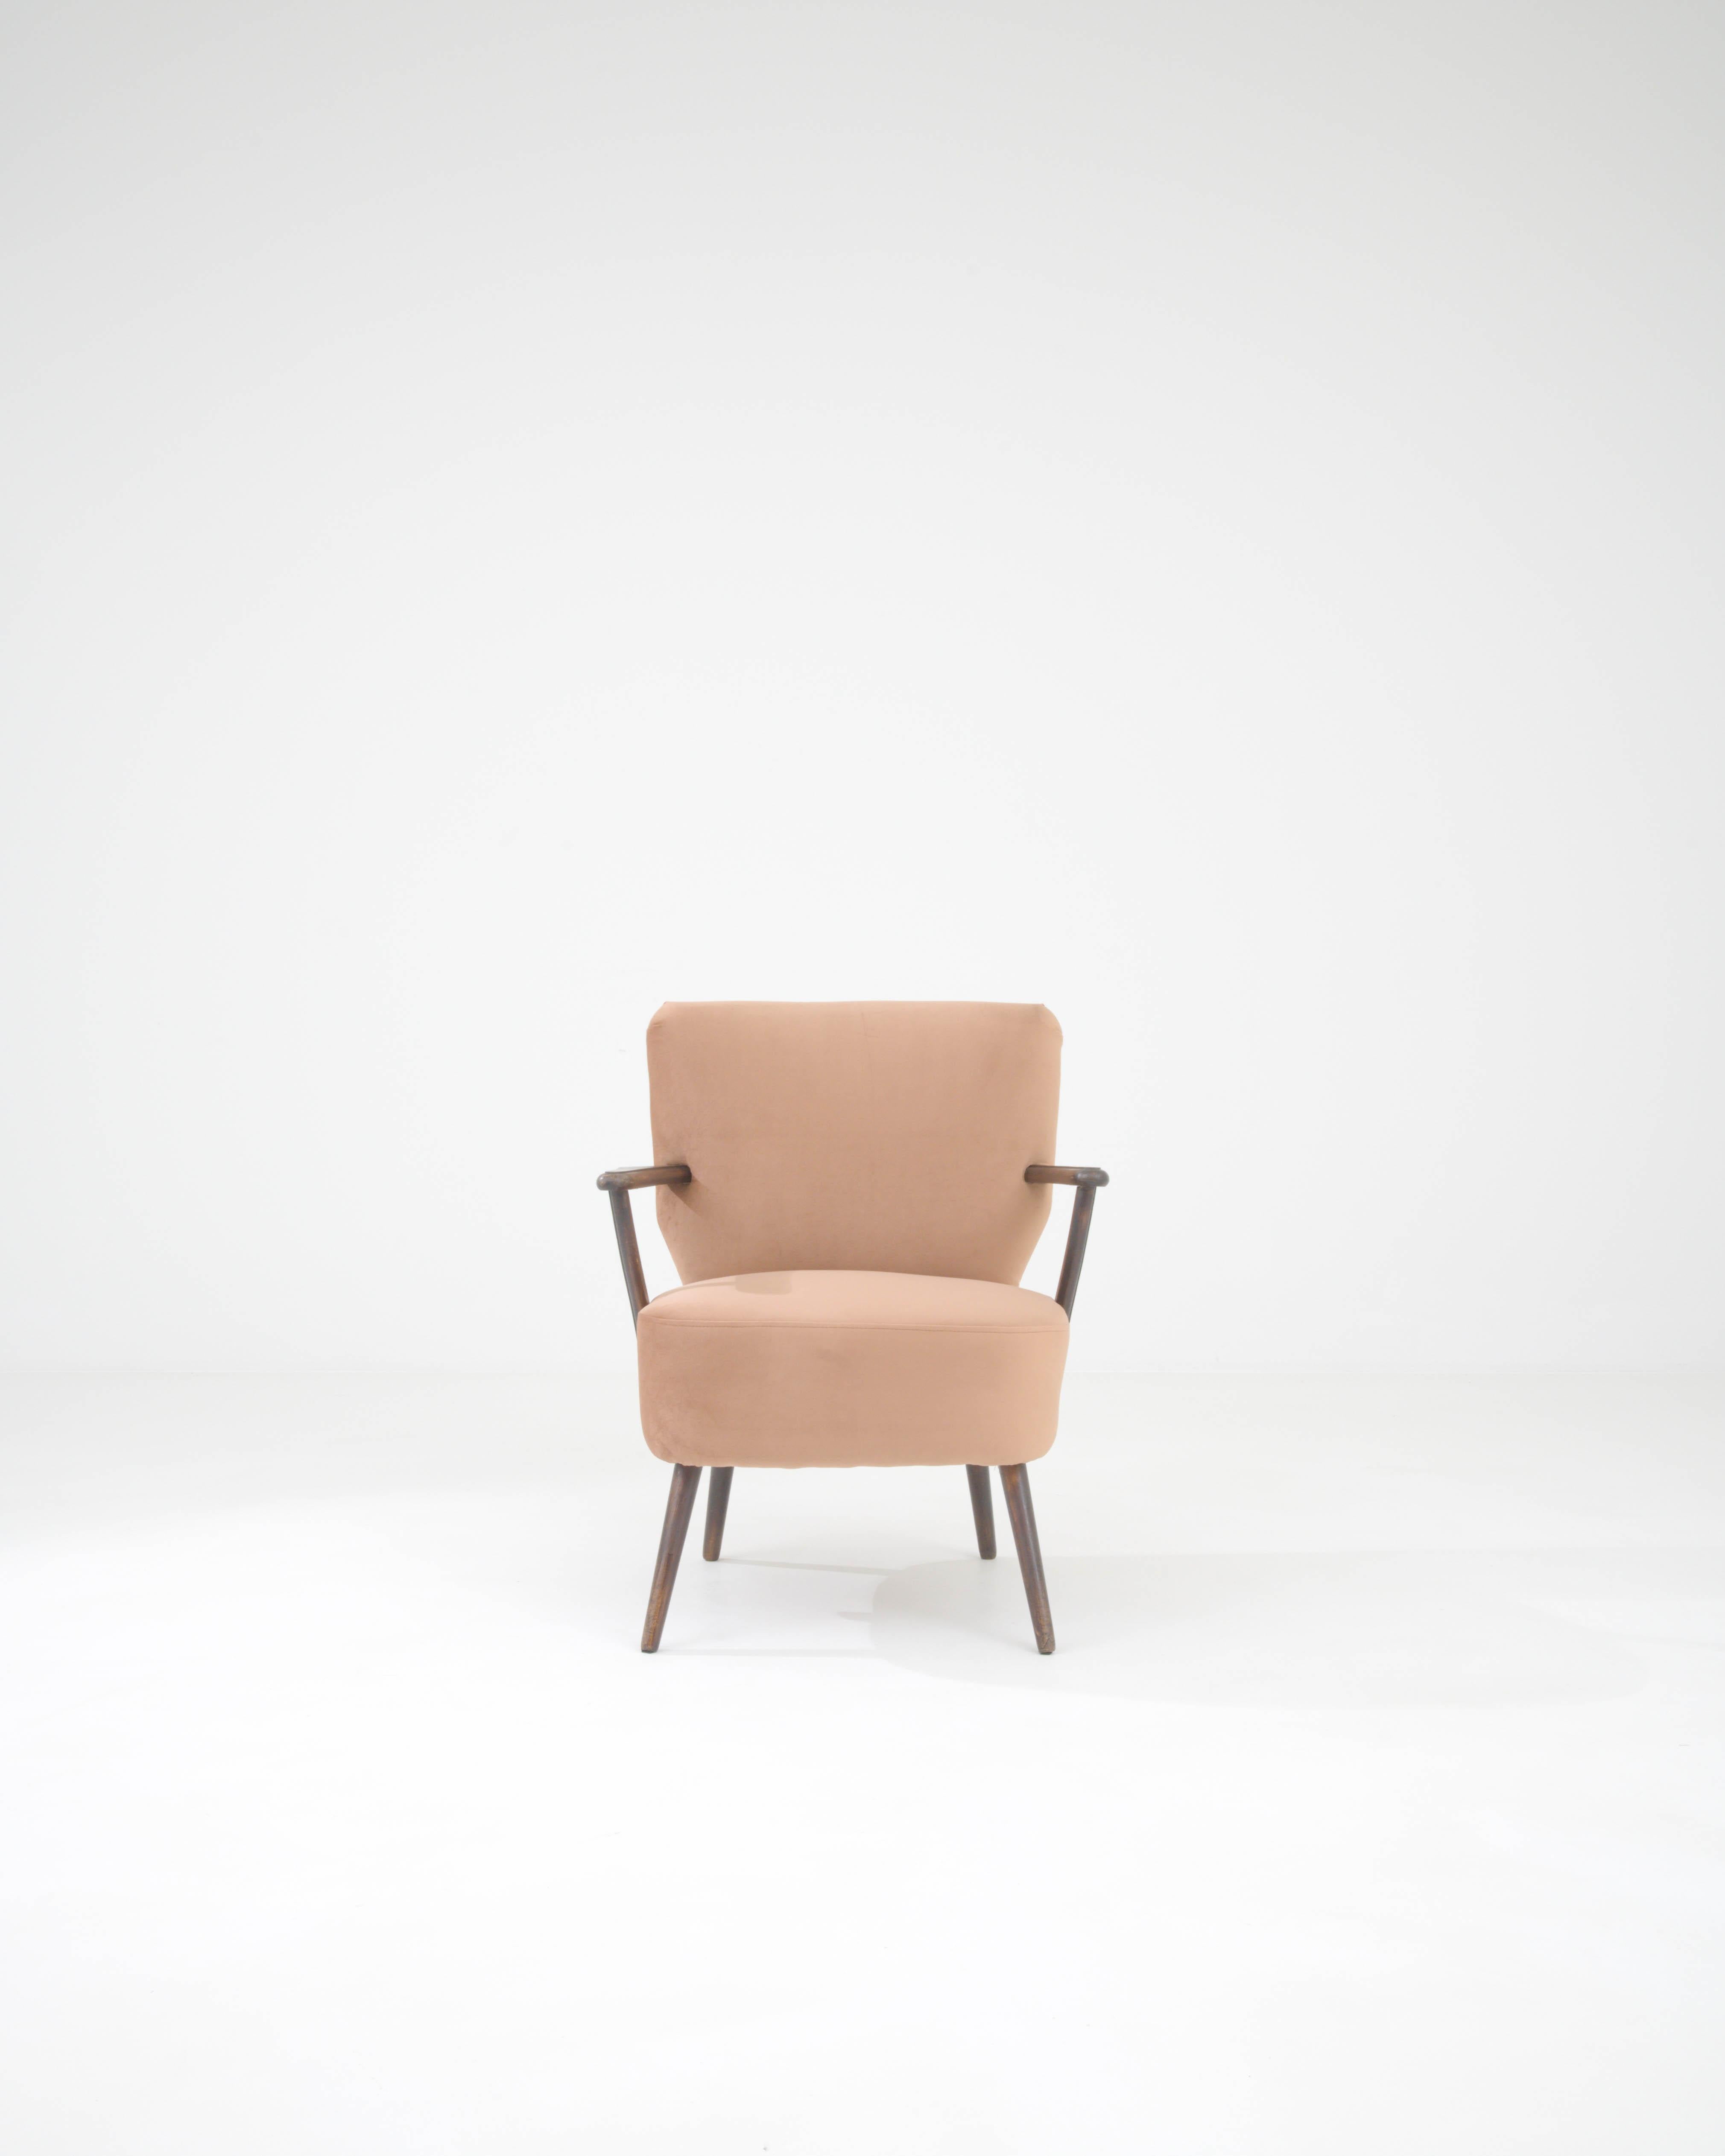 Introducing the quintessence of mid-century charm — our 1950s Danish Upholstered Armchair. This piece captures the spirit of Danish design with its minimalist aesthetic and functional form. It's an invitation to timeless elegance with its sleek